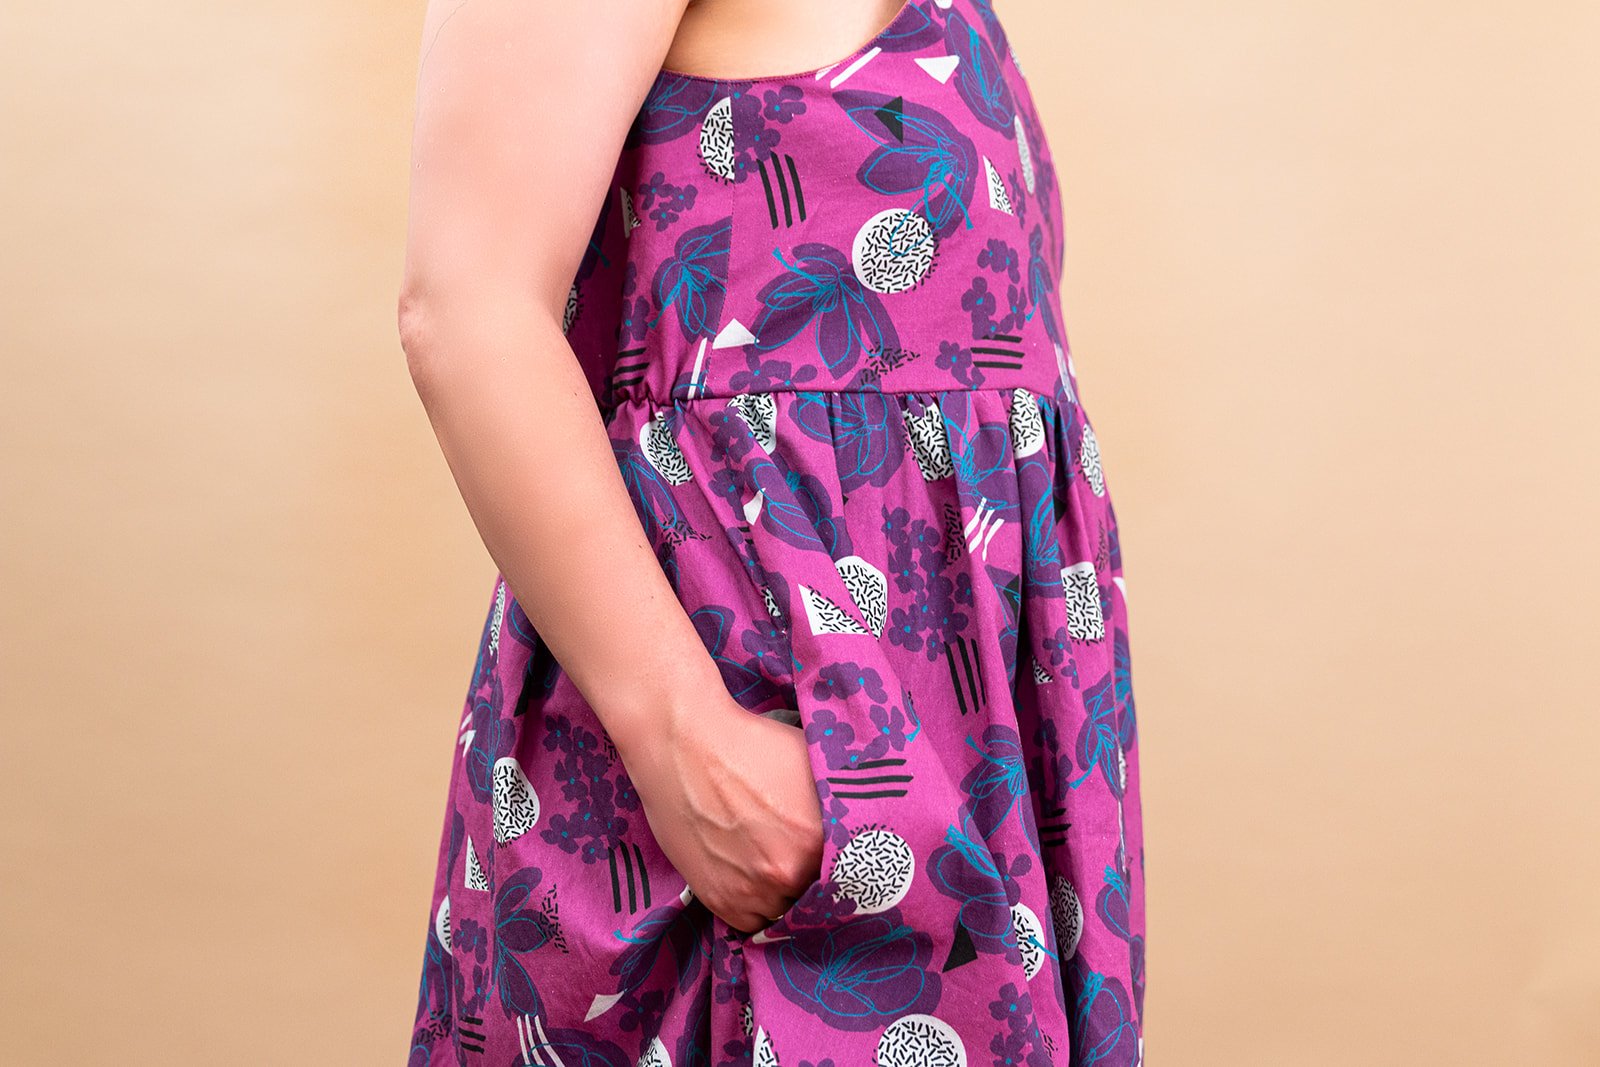 Dreaming Dress by @noaestheticquilts